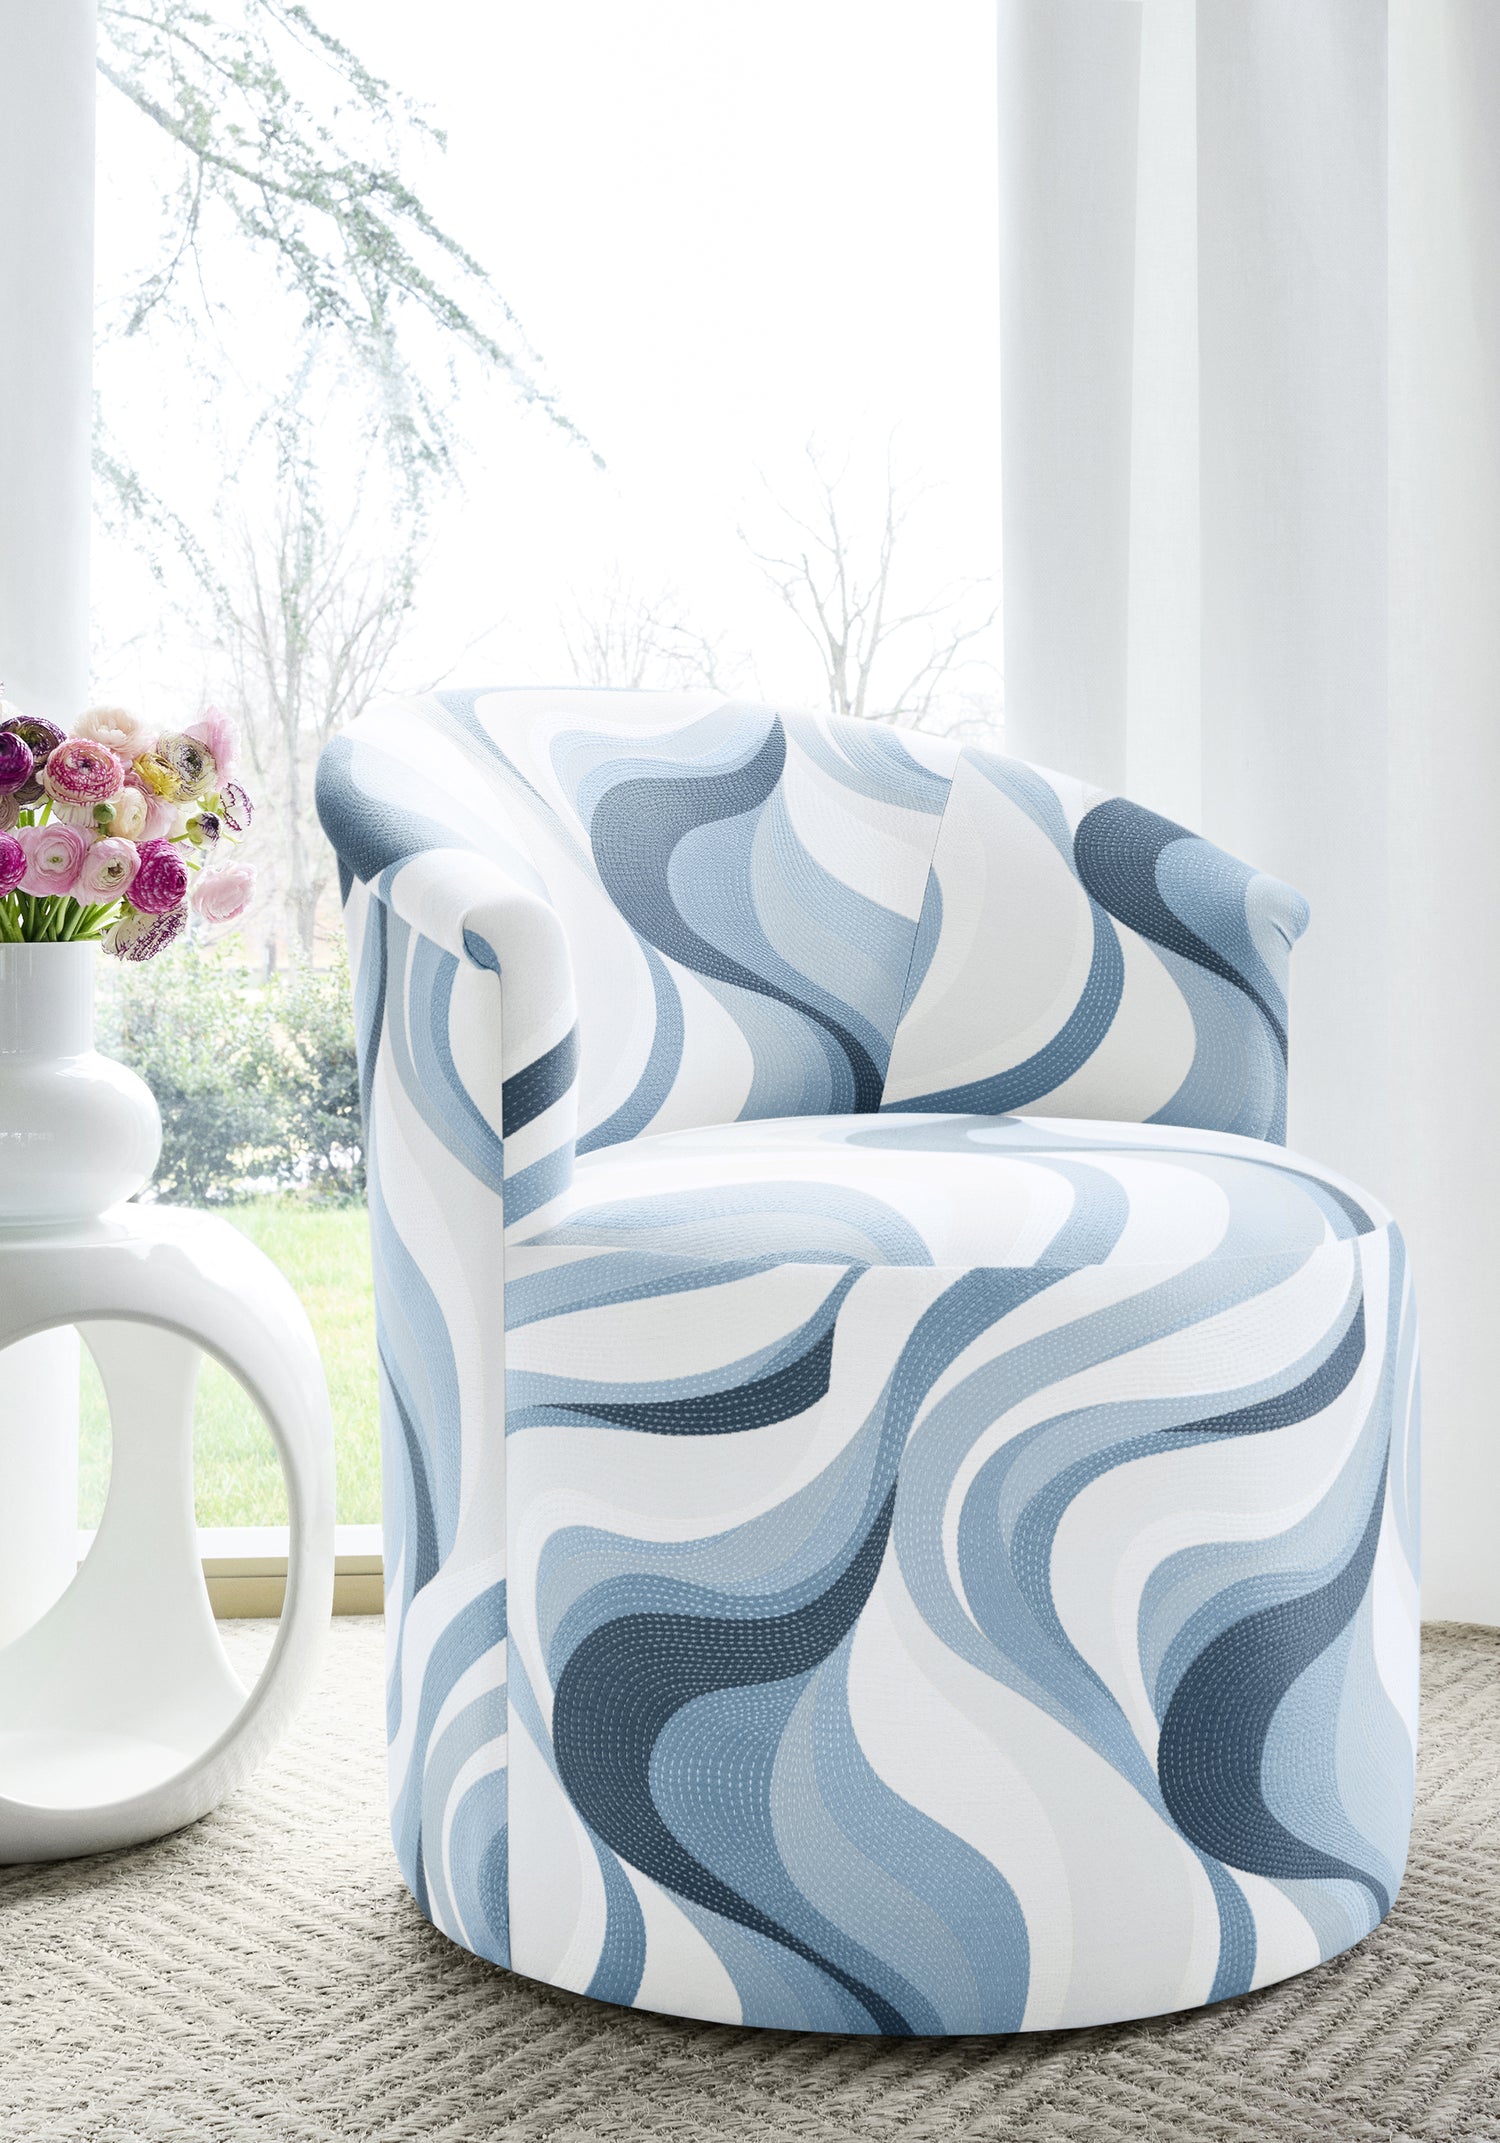 Ashby Chair with upholstered base in Passage woven fabric in waterfall color - pattern number W74203 - by Thibaut fabrics